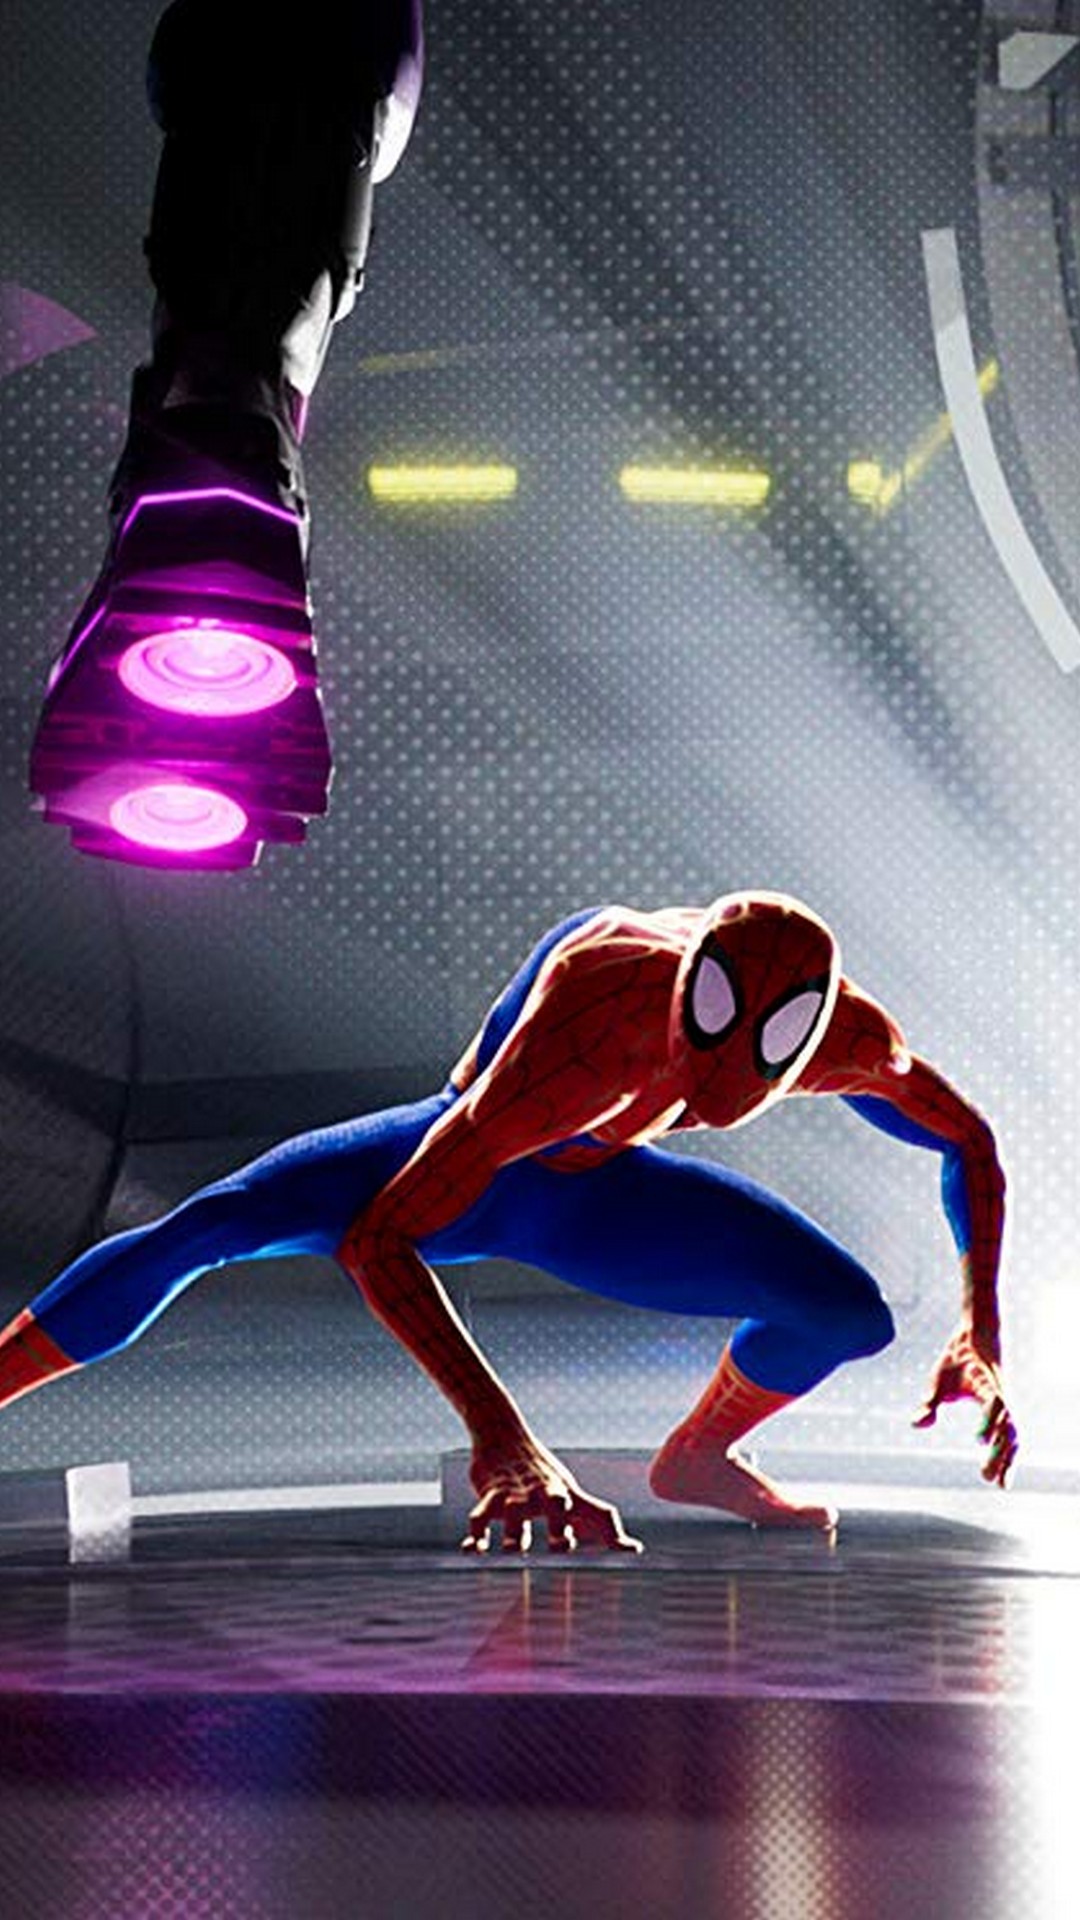 Spider-Man Into the Spider-Verse Mobile Wallpaper with image resolution 1080x1920 pixel. You can use this wallpaper as background for your desktop Computer Screensavers, Android or iPhone smartphones